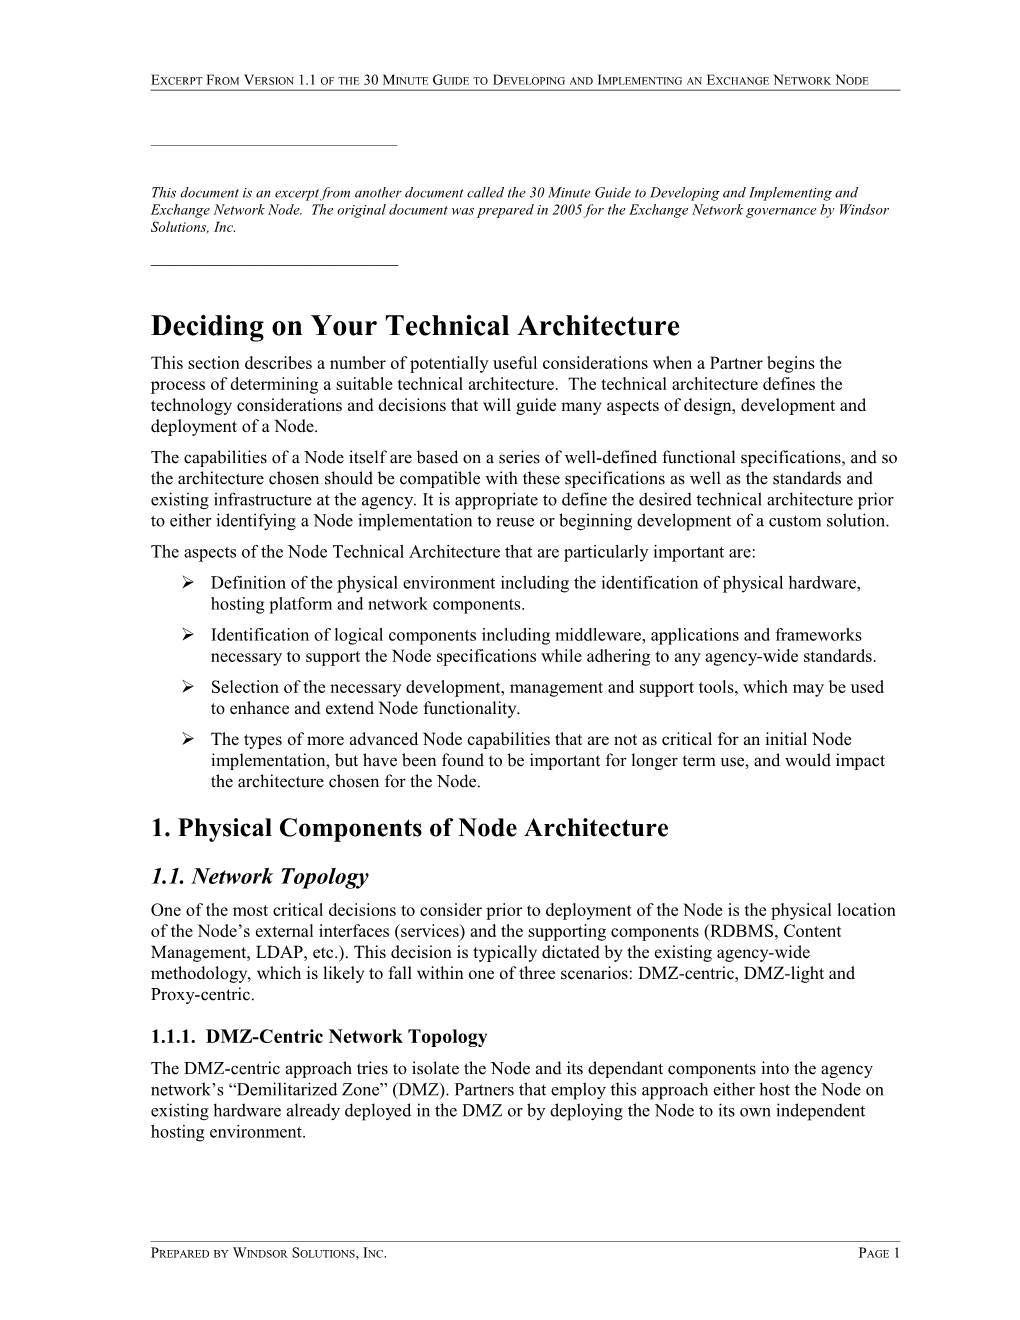 Deciding on Your Technical Architecture